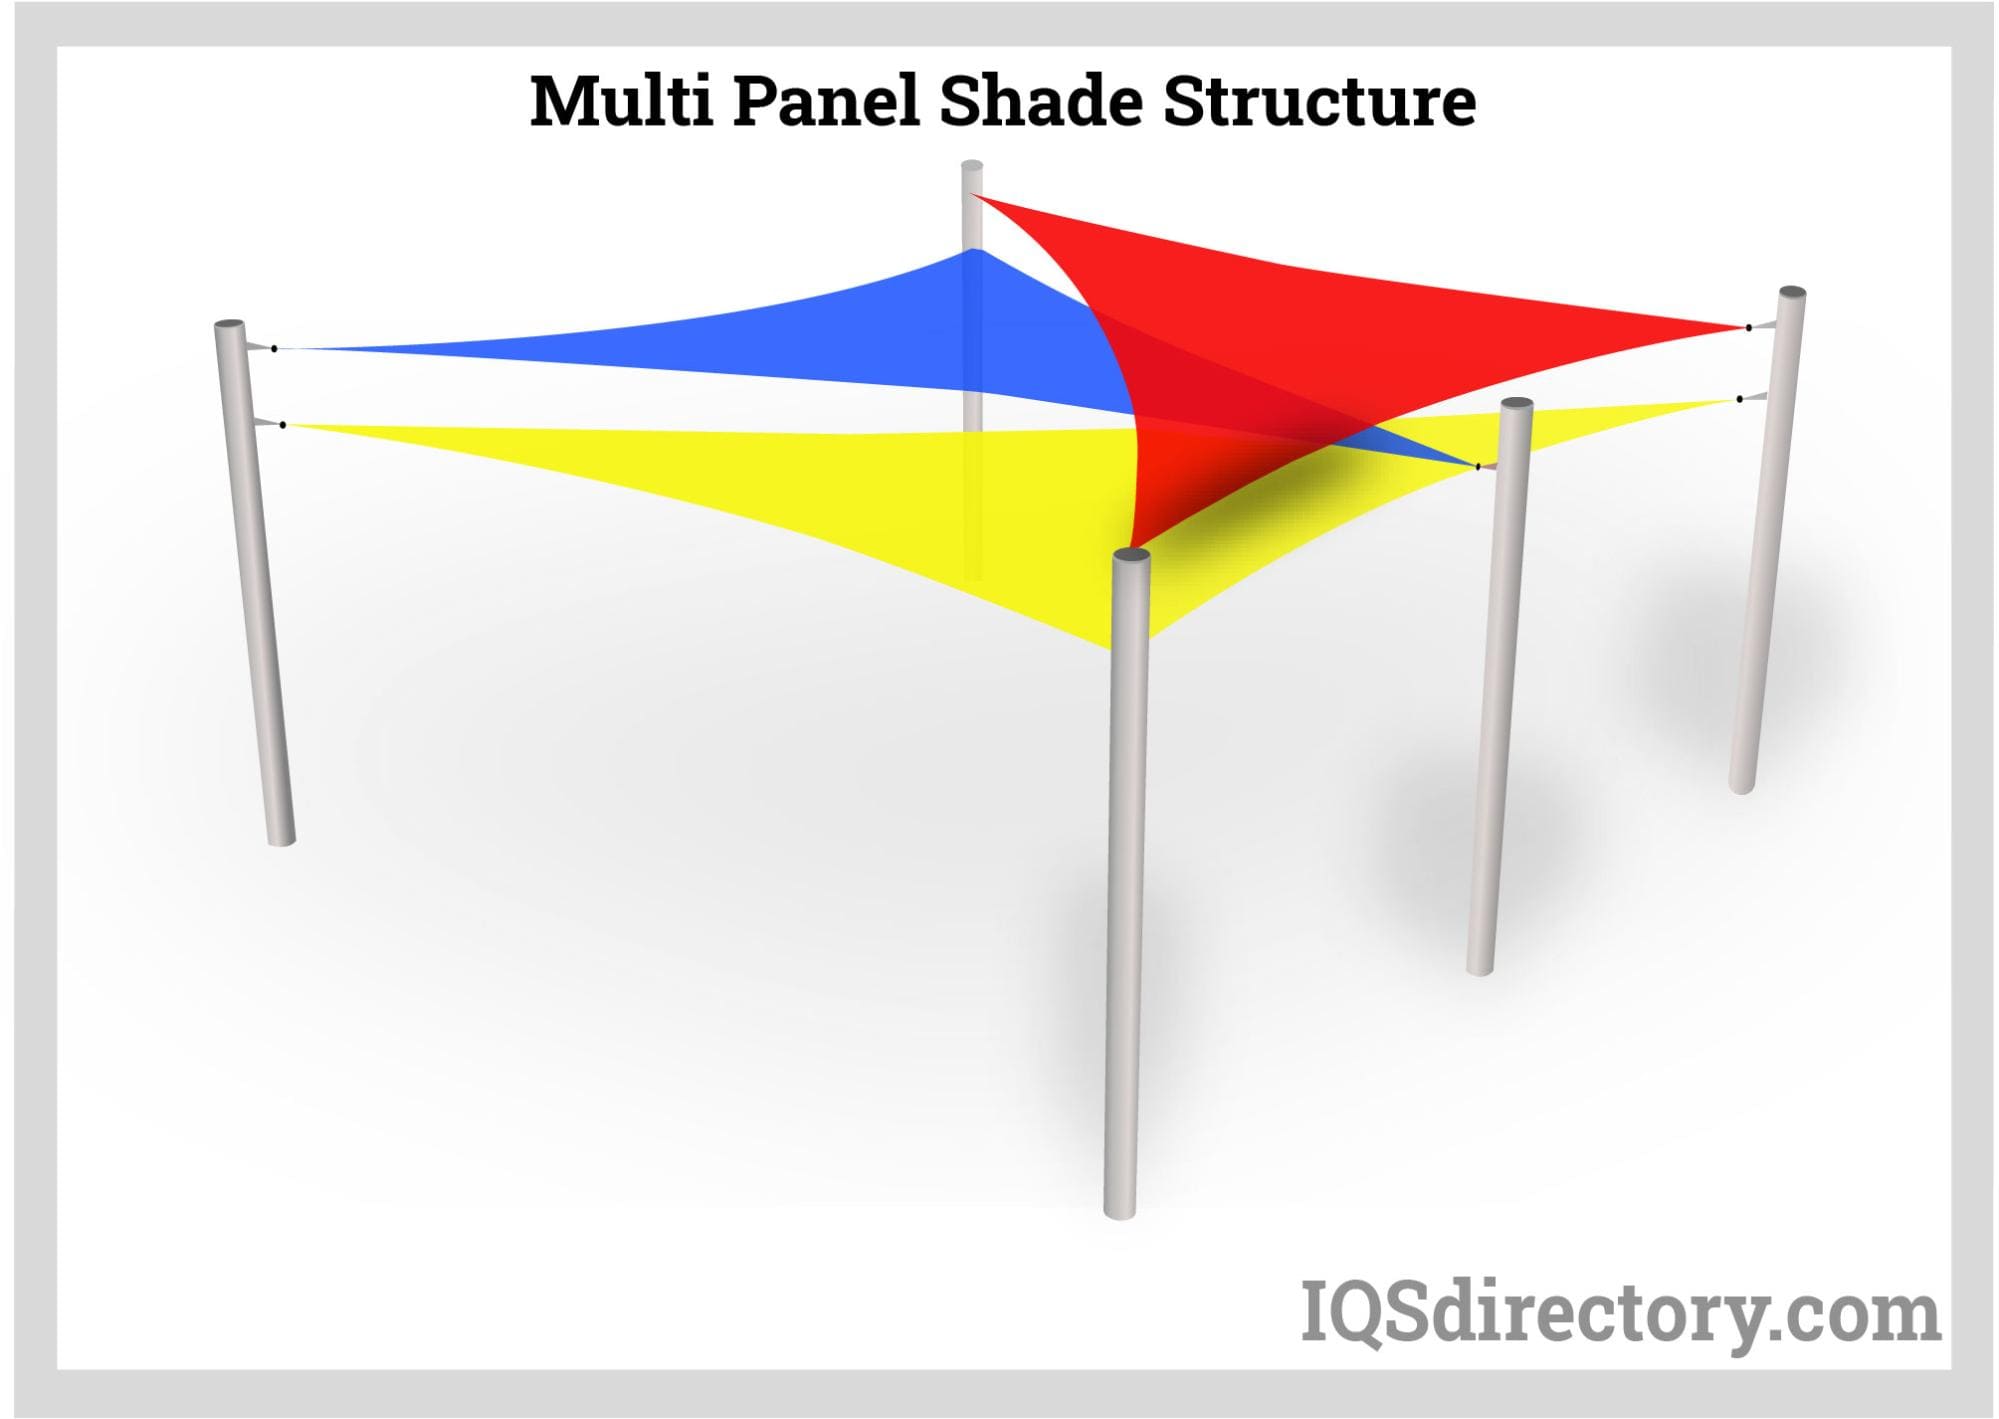 Multi Panel Shade Structure